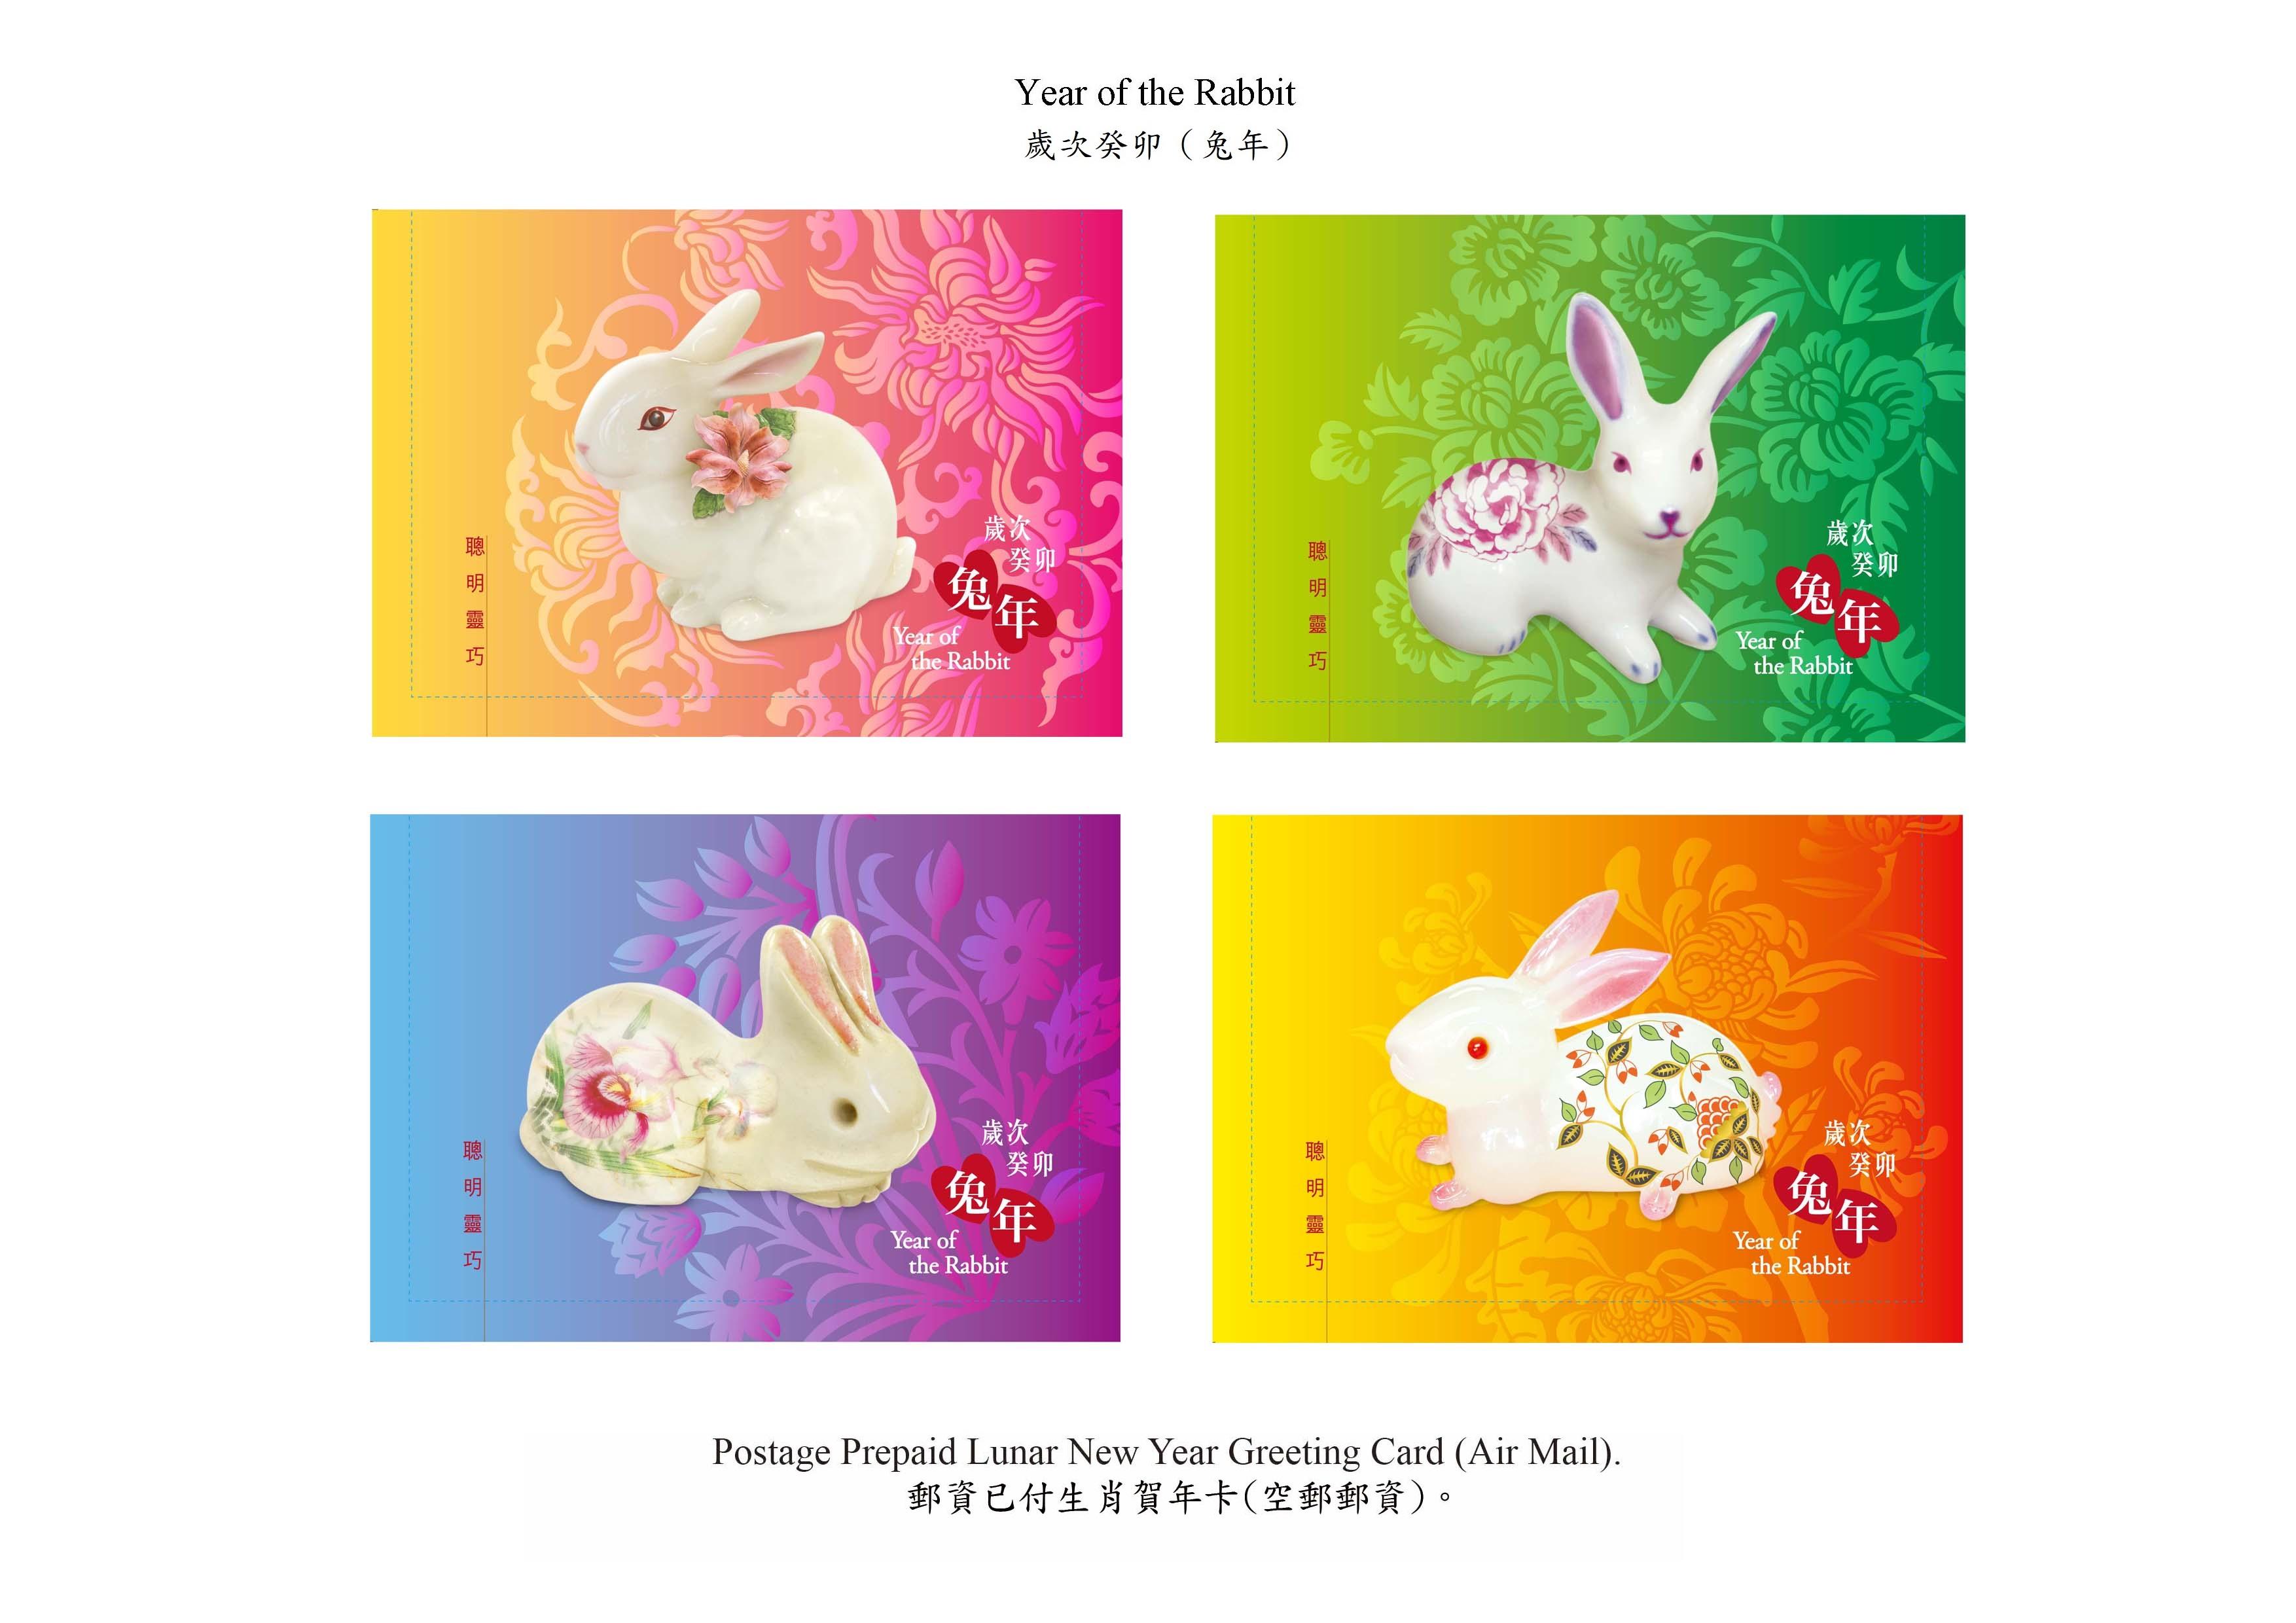 Hongkong Post will launch a special stamp issue and associated philatelic products with the theme "Year of the Rabbit" on January 10, 2023 (Tuesday). Photo shows the postage prepaid Lunar New Year greeting cards (air mail).
